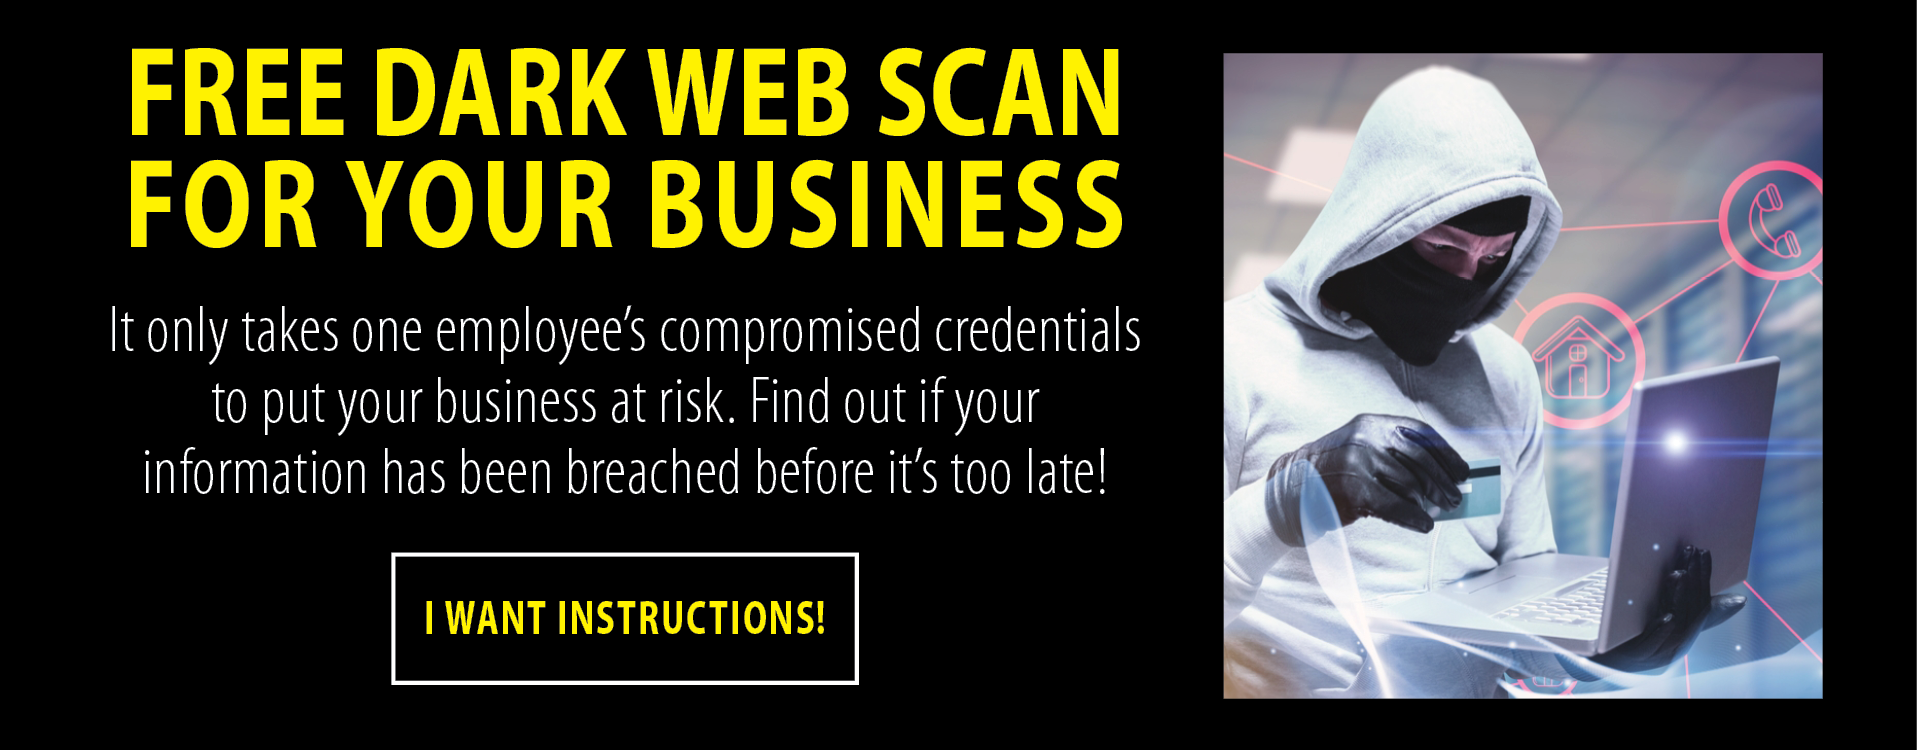 free dark web scan for your business